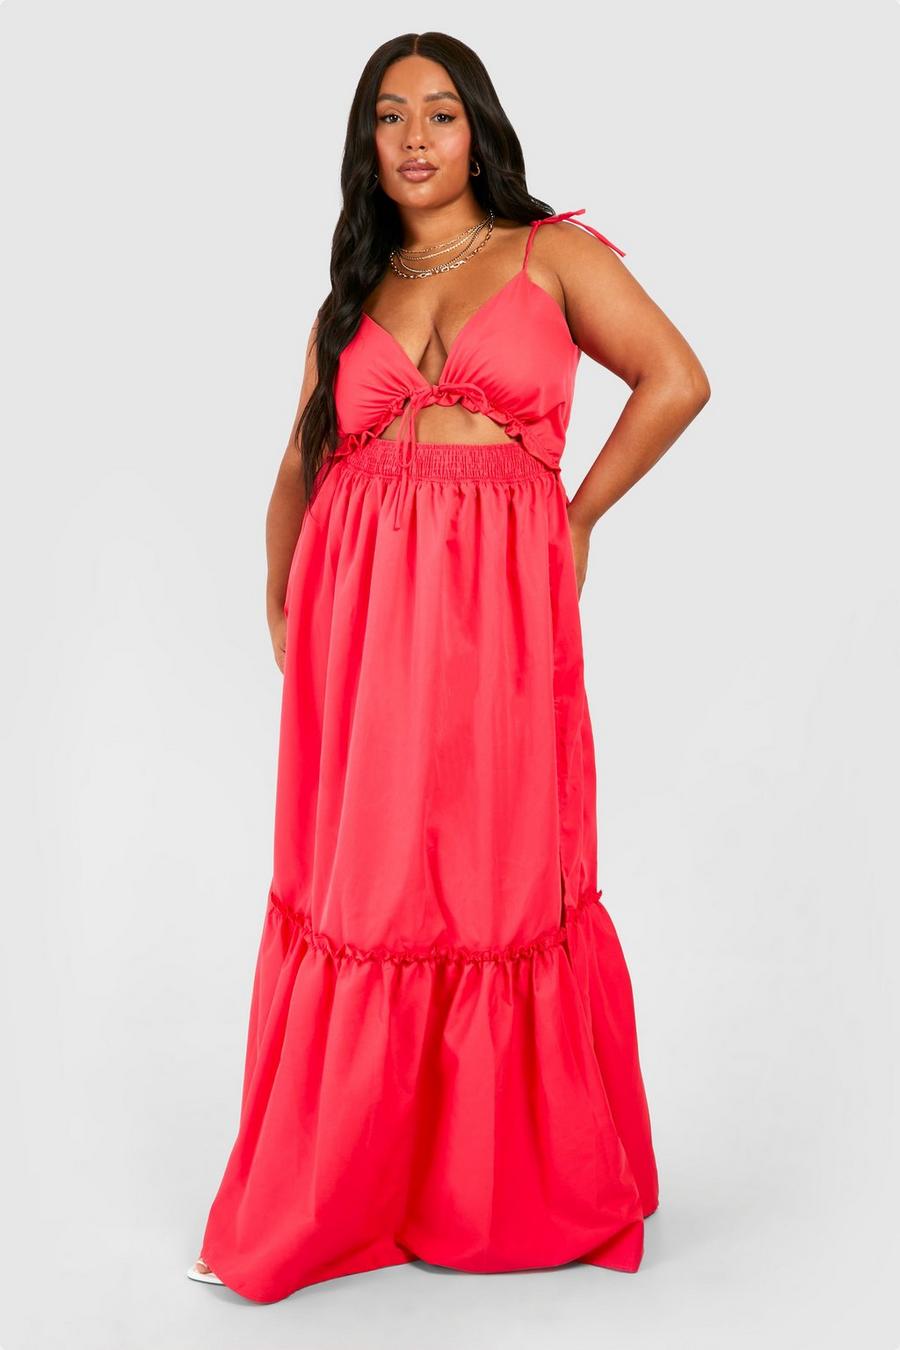 Hot pink Tall All Occasion Dresses